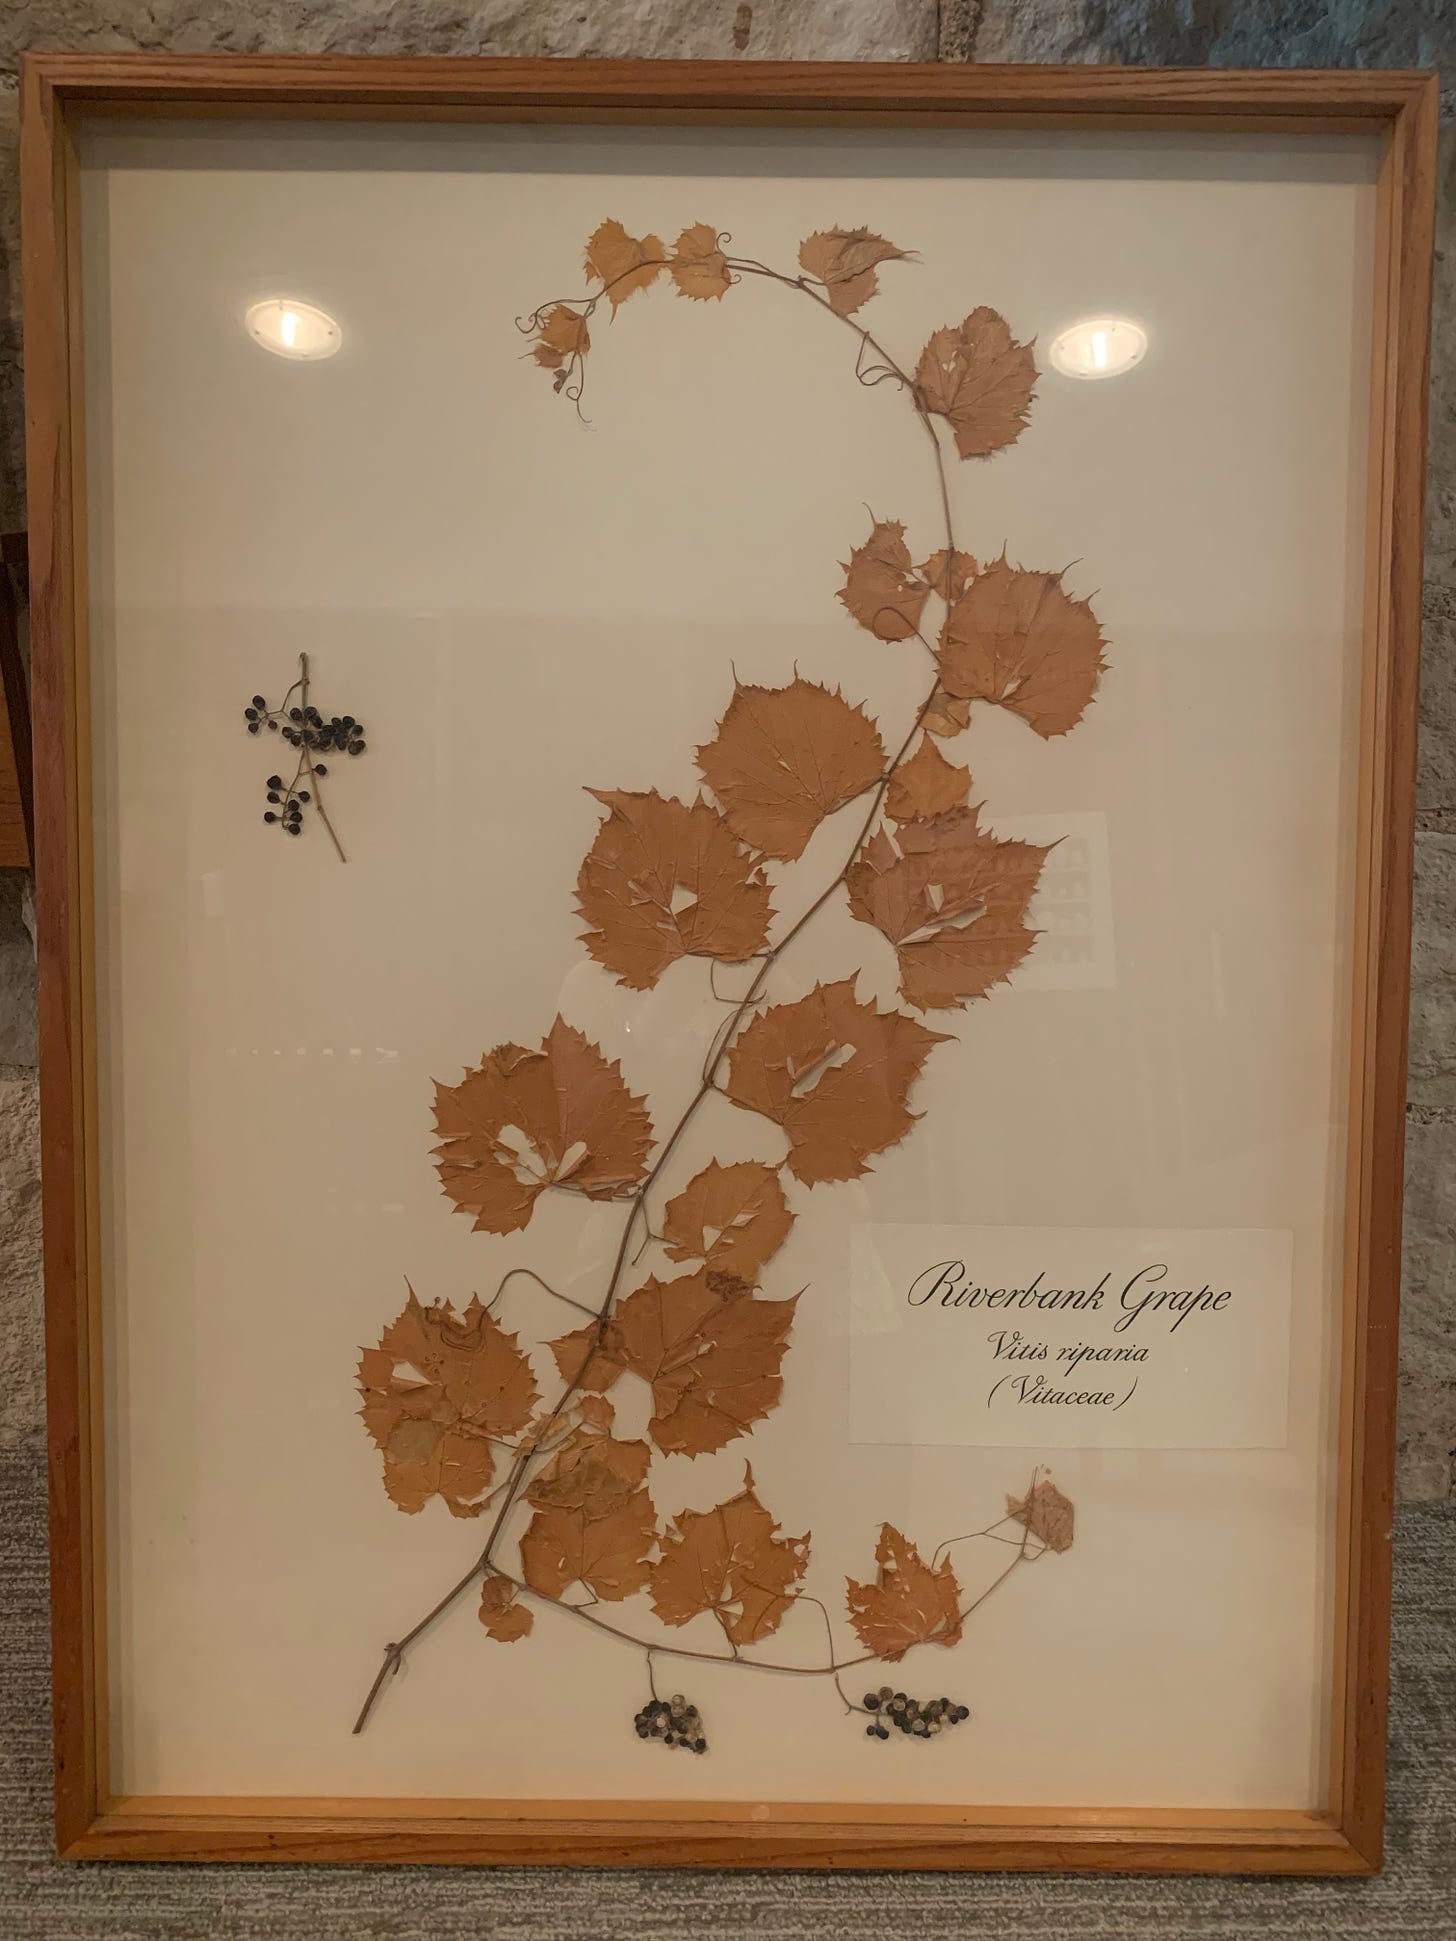 A large curving vine with small dark berries next to it, pressed and in a wood and glass frame.